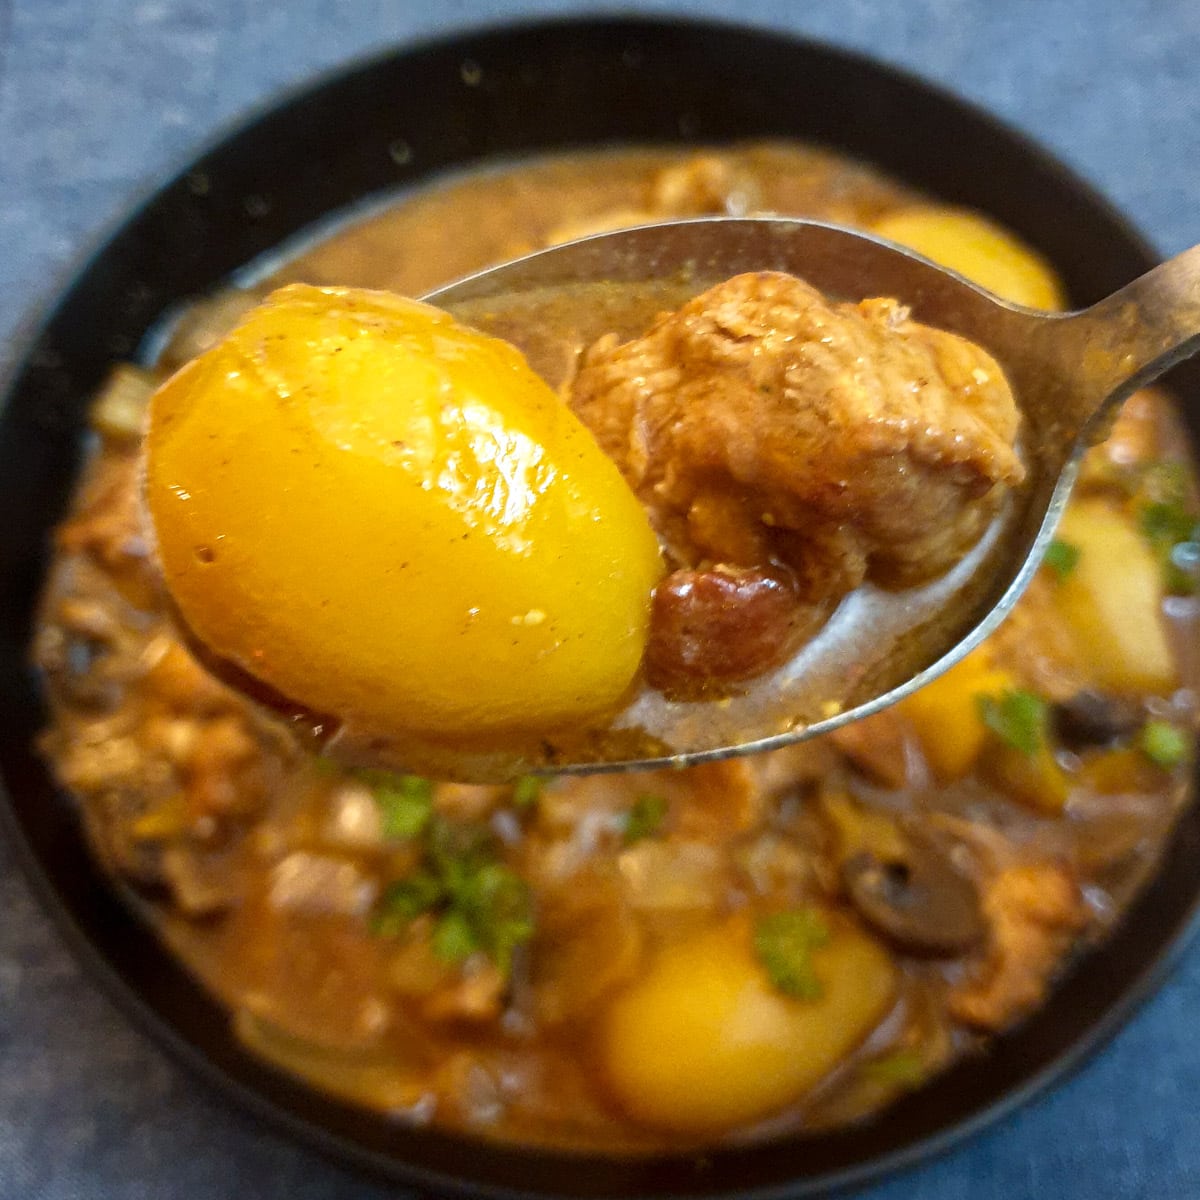 A potato and a piece of pork on a spoon held about a dish of pork casserole.